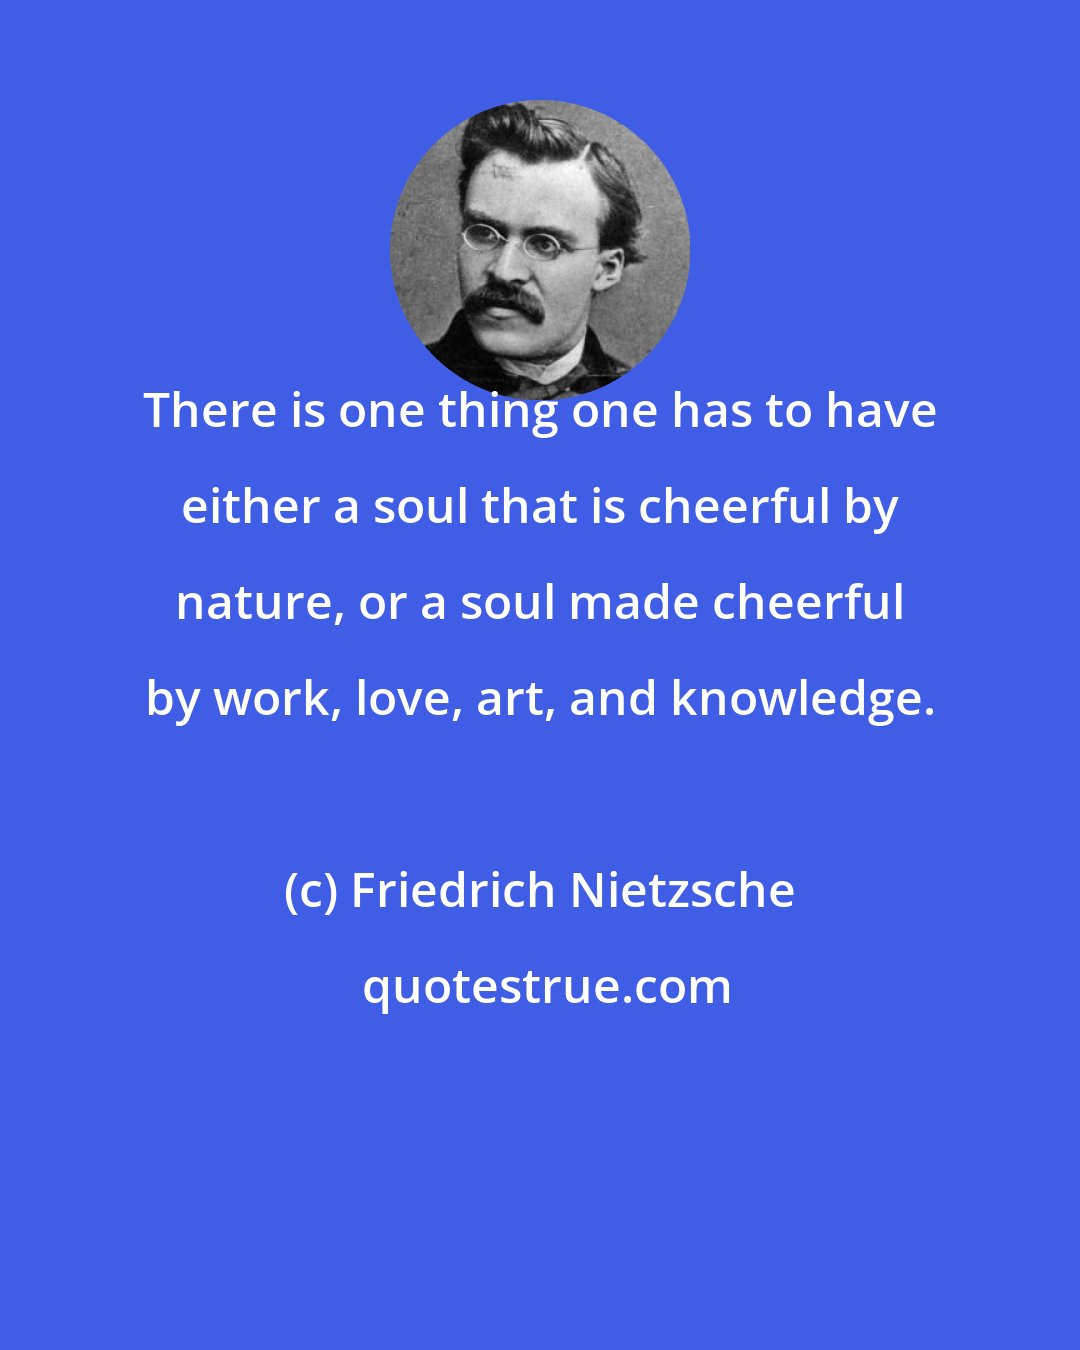 Friedrich Nietzsche: There is one thing one has to have either a soul that is cheerful by nature, or a soul made cheerful by work, love, art, and knowledge.